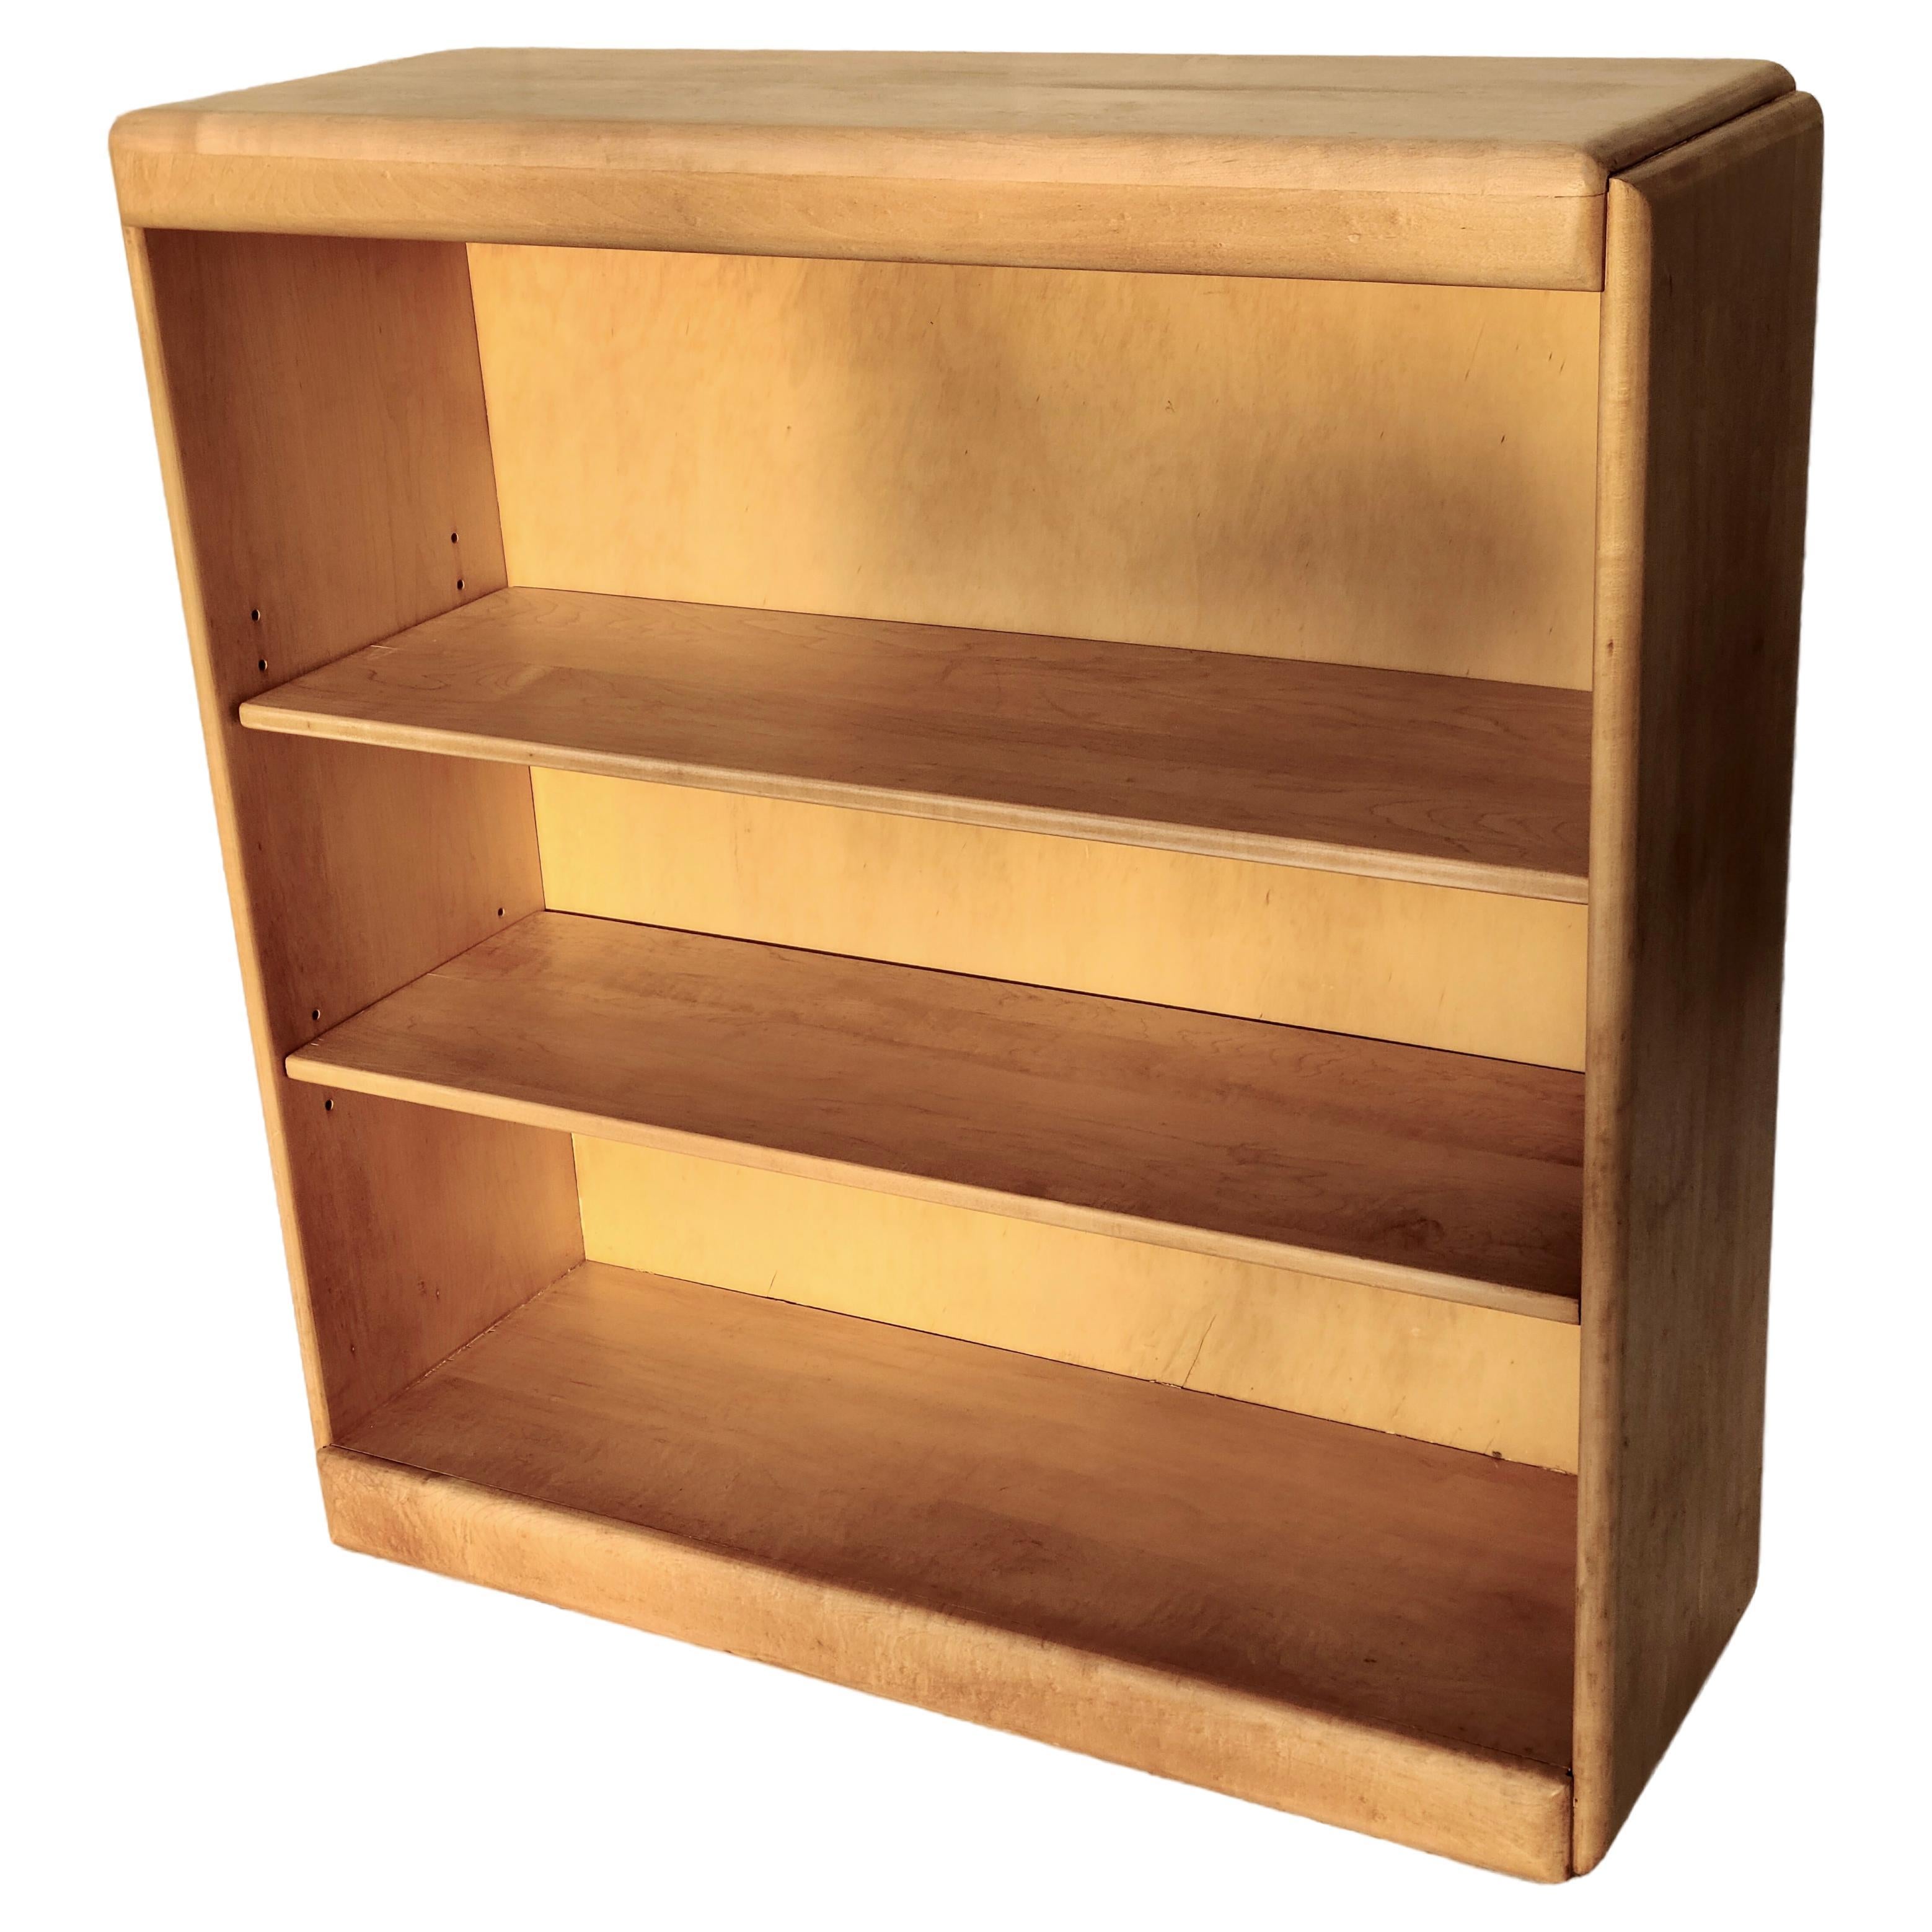 Rare Bookshelf from the American Modern series.
Designed by Russel Wright for Conant Ball.
Maple Construction. 